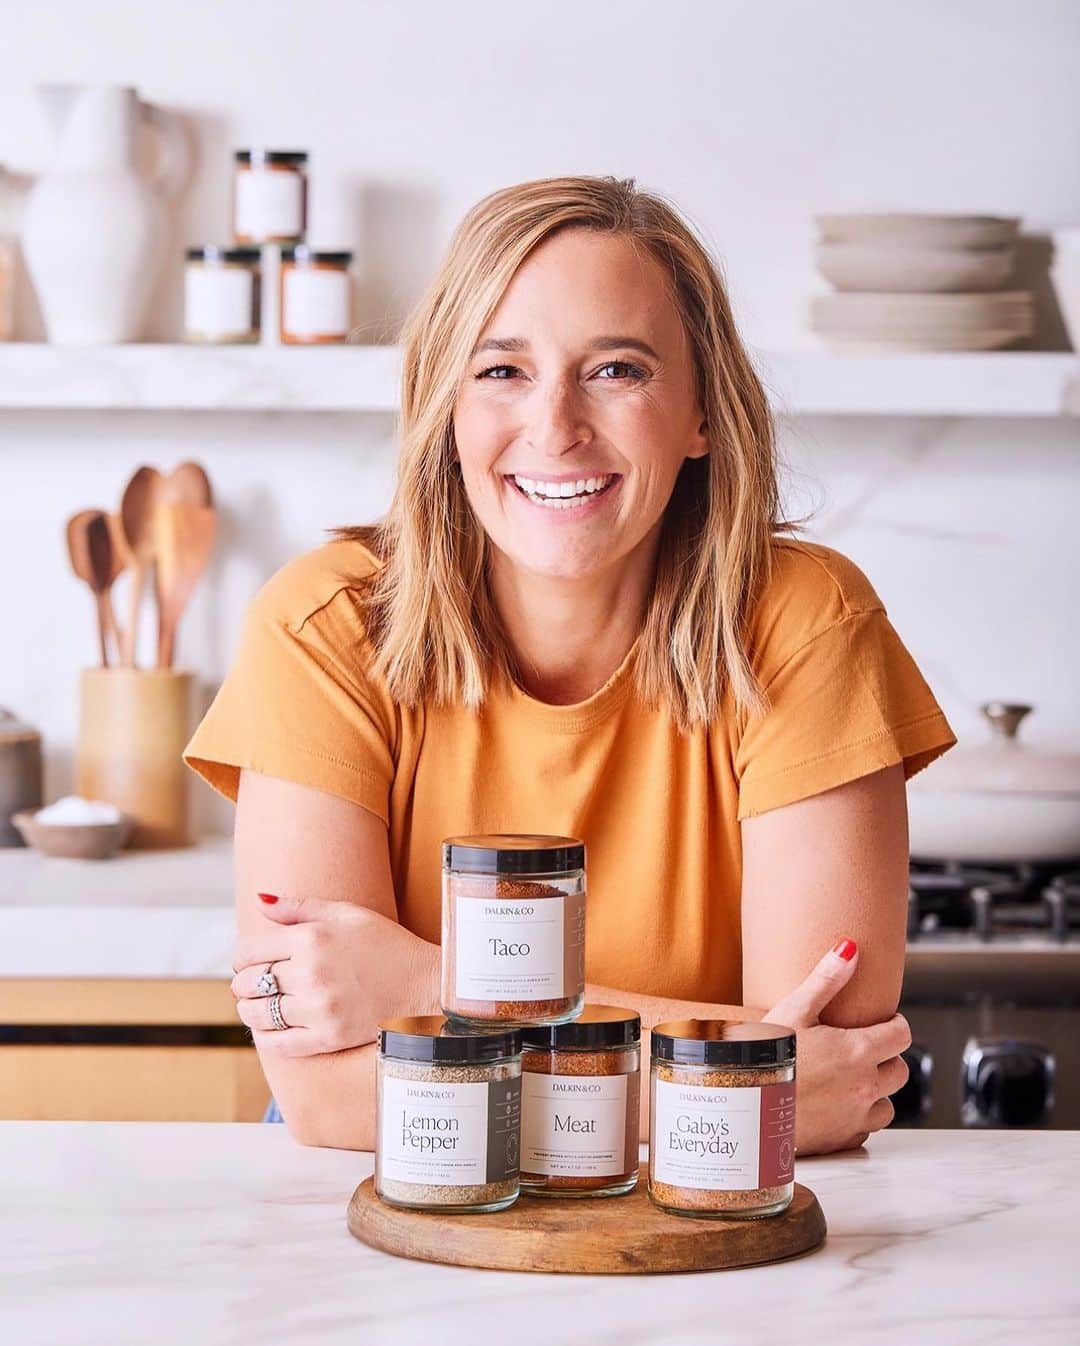 Gaby Dalkinのインスタグラム：「Today's the day!! I'm beyond thrilled to introduce you to our latest and greatest venture: @dalkinandco   Dalkin&Co is your go-to pantry resource where you can find the best seasoning blends that will make every meal more delicious. Shop now with the link in my bio or go to dalkinandco.co to discover all the products and recipes to go along with them!   Thank you in advance for all the love and continued support. I can't believe after years of dreaming up this brand, thousands of recipe tests, countless conversations with you guys and hundreds of iterations of the product, Dalkin&Co is finally here!!  https://dalkinandco.co/」